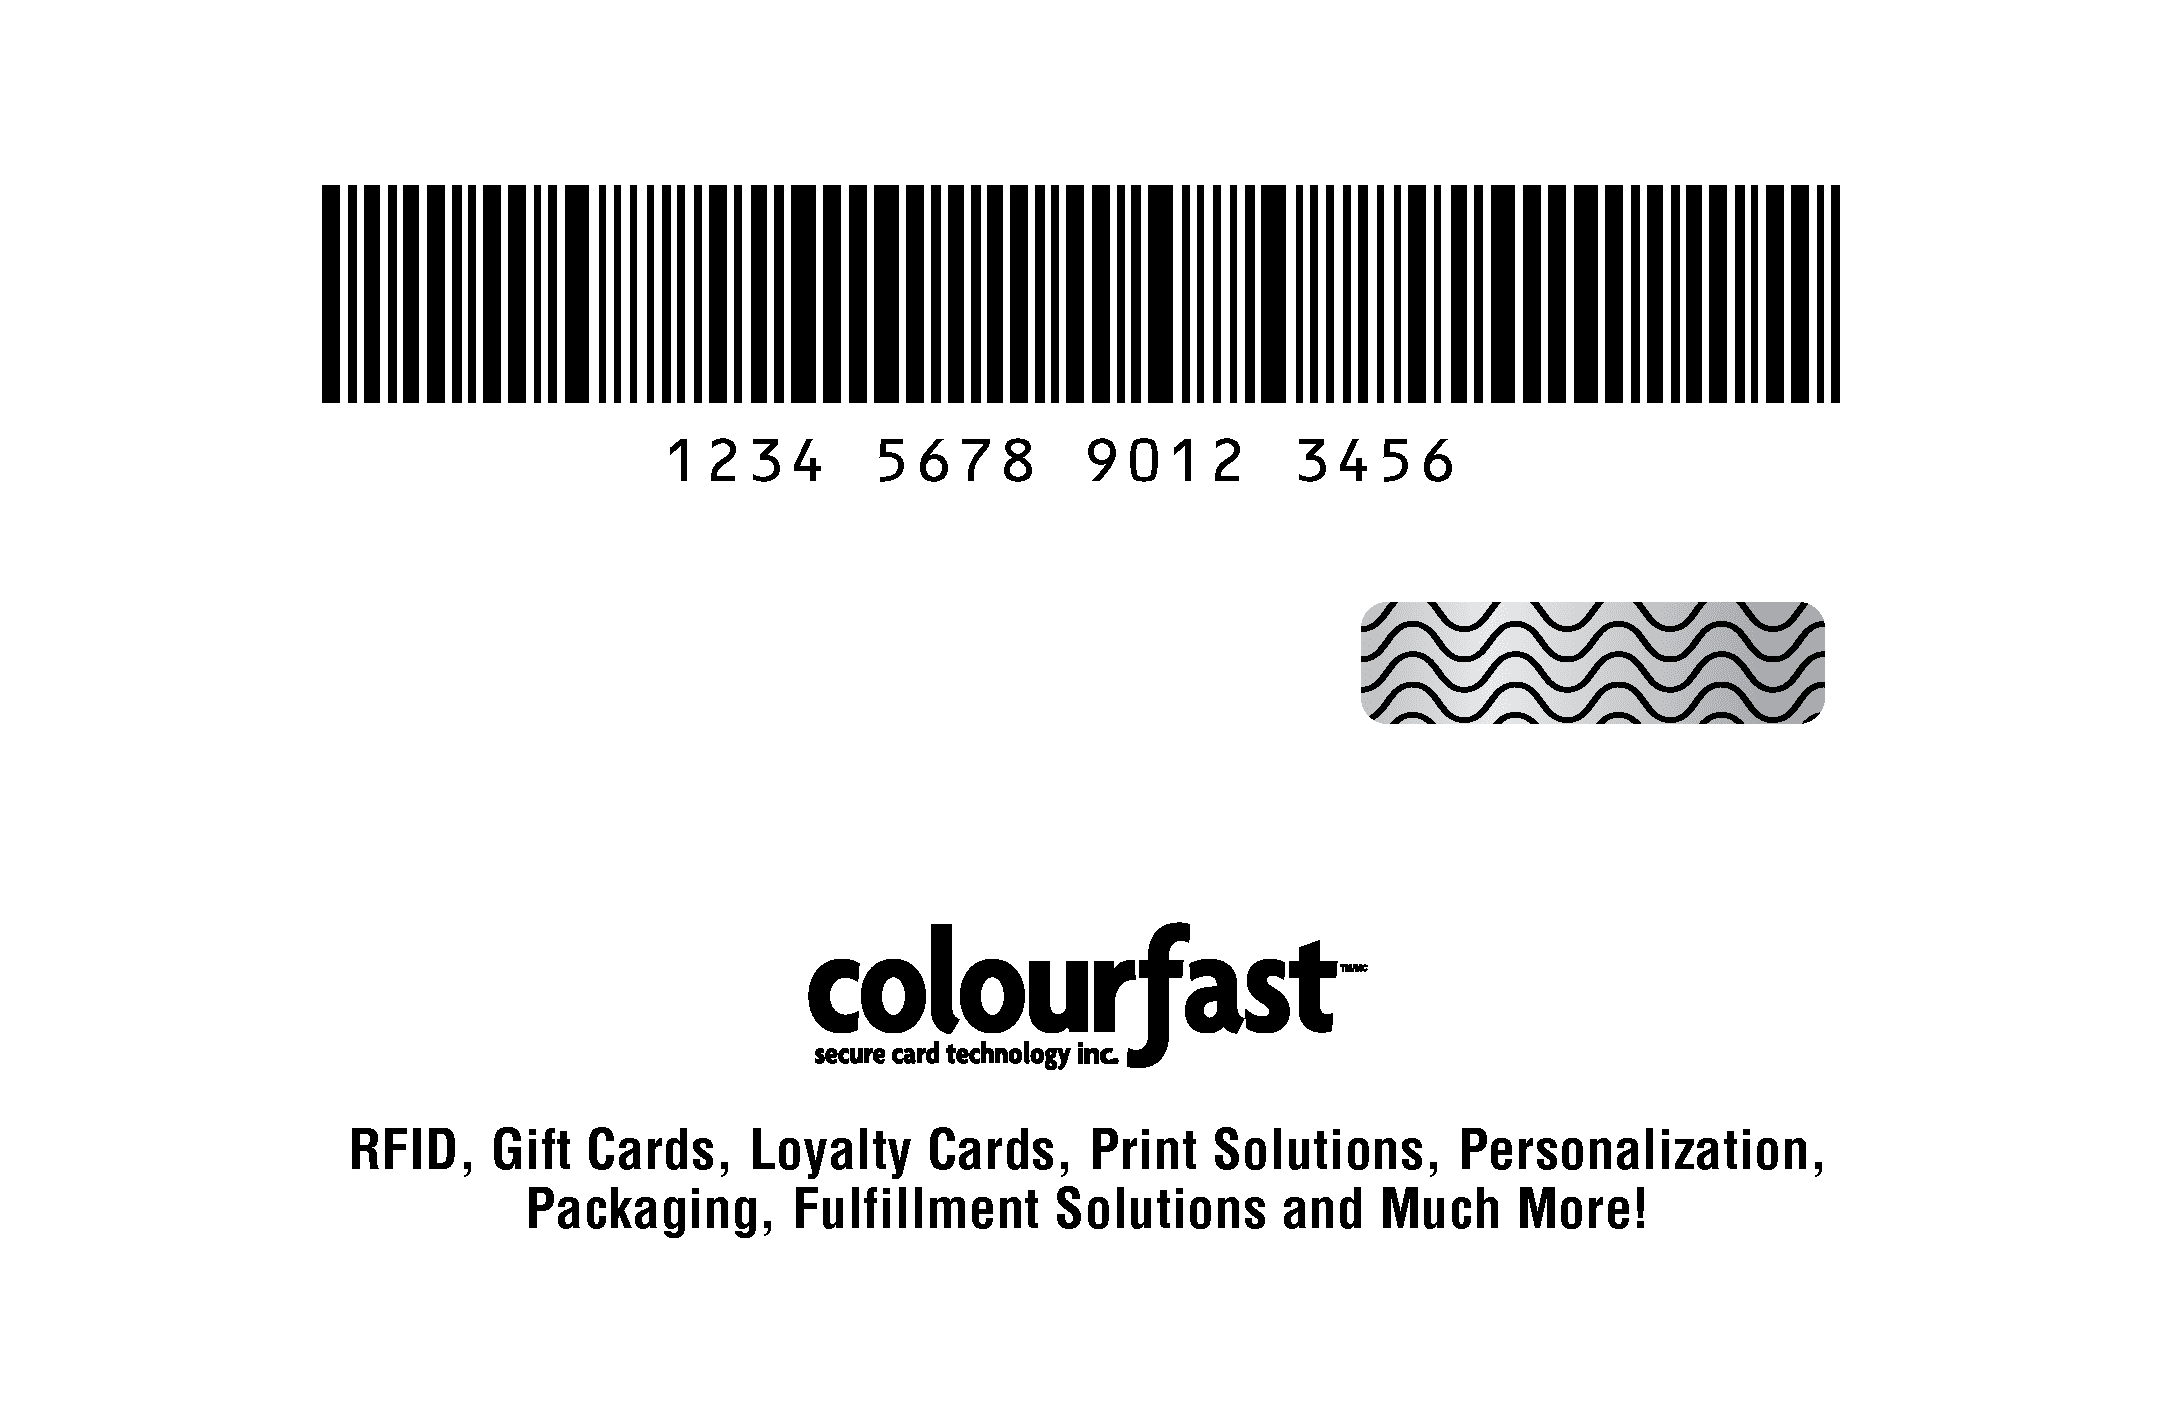 Image of Variable Barcode, Human-readable number, Scratch Off Panel